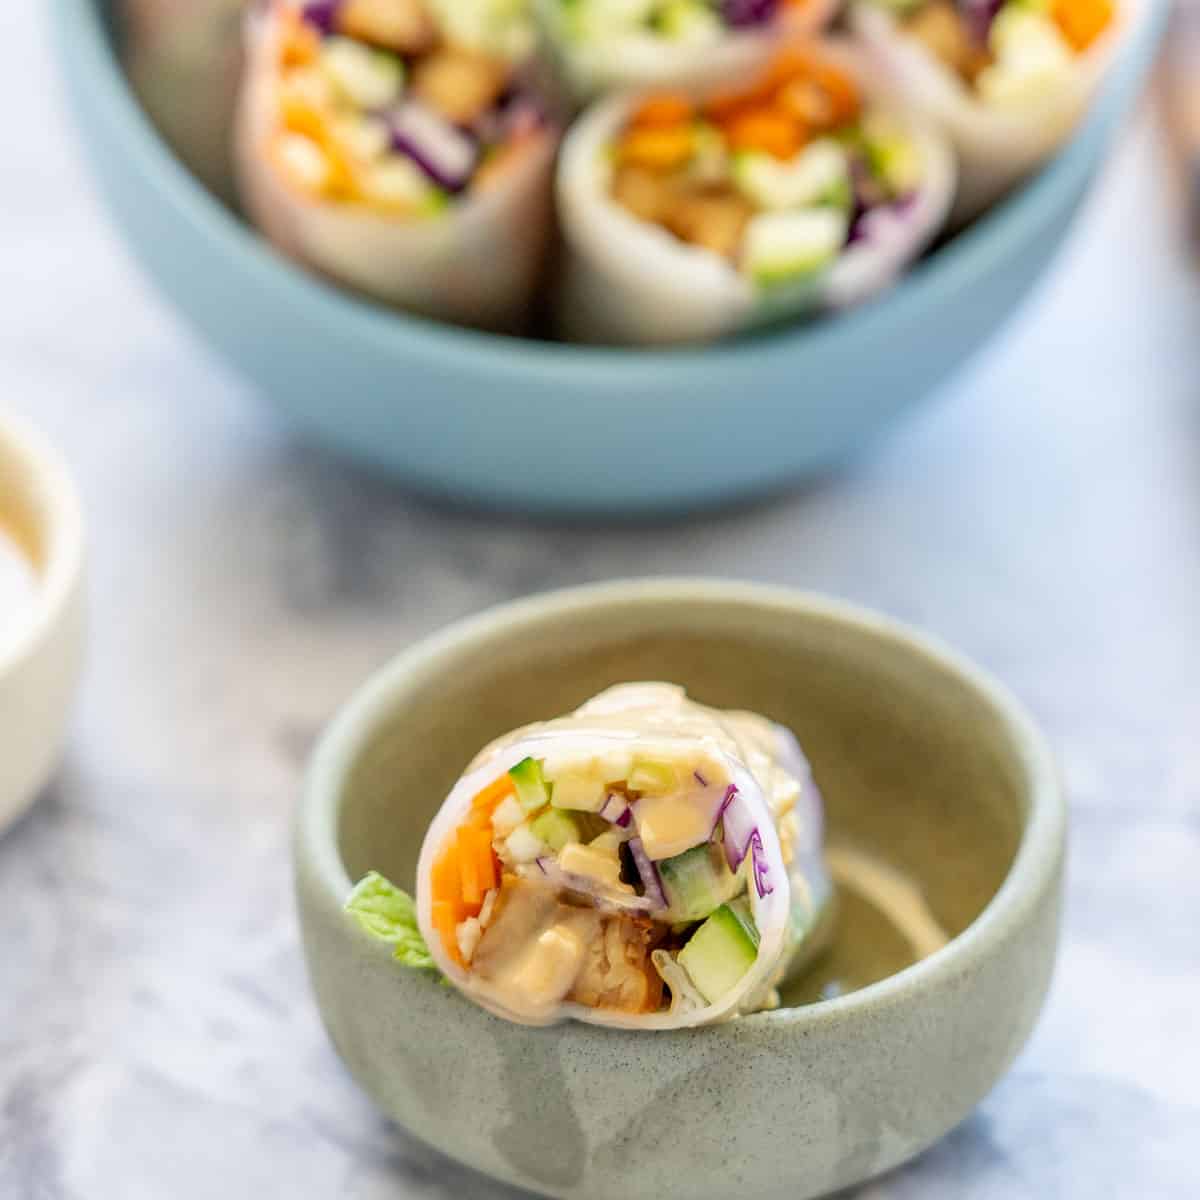 A vietnamese rice paper roll filled with colourful vegetables resting in a small ceramic bowl.